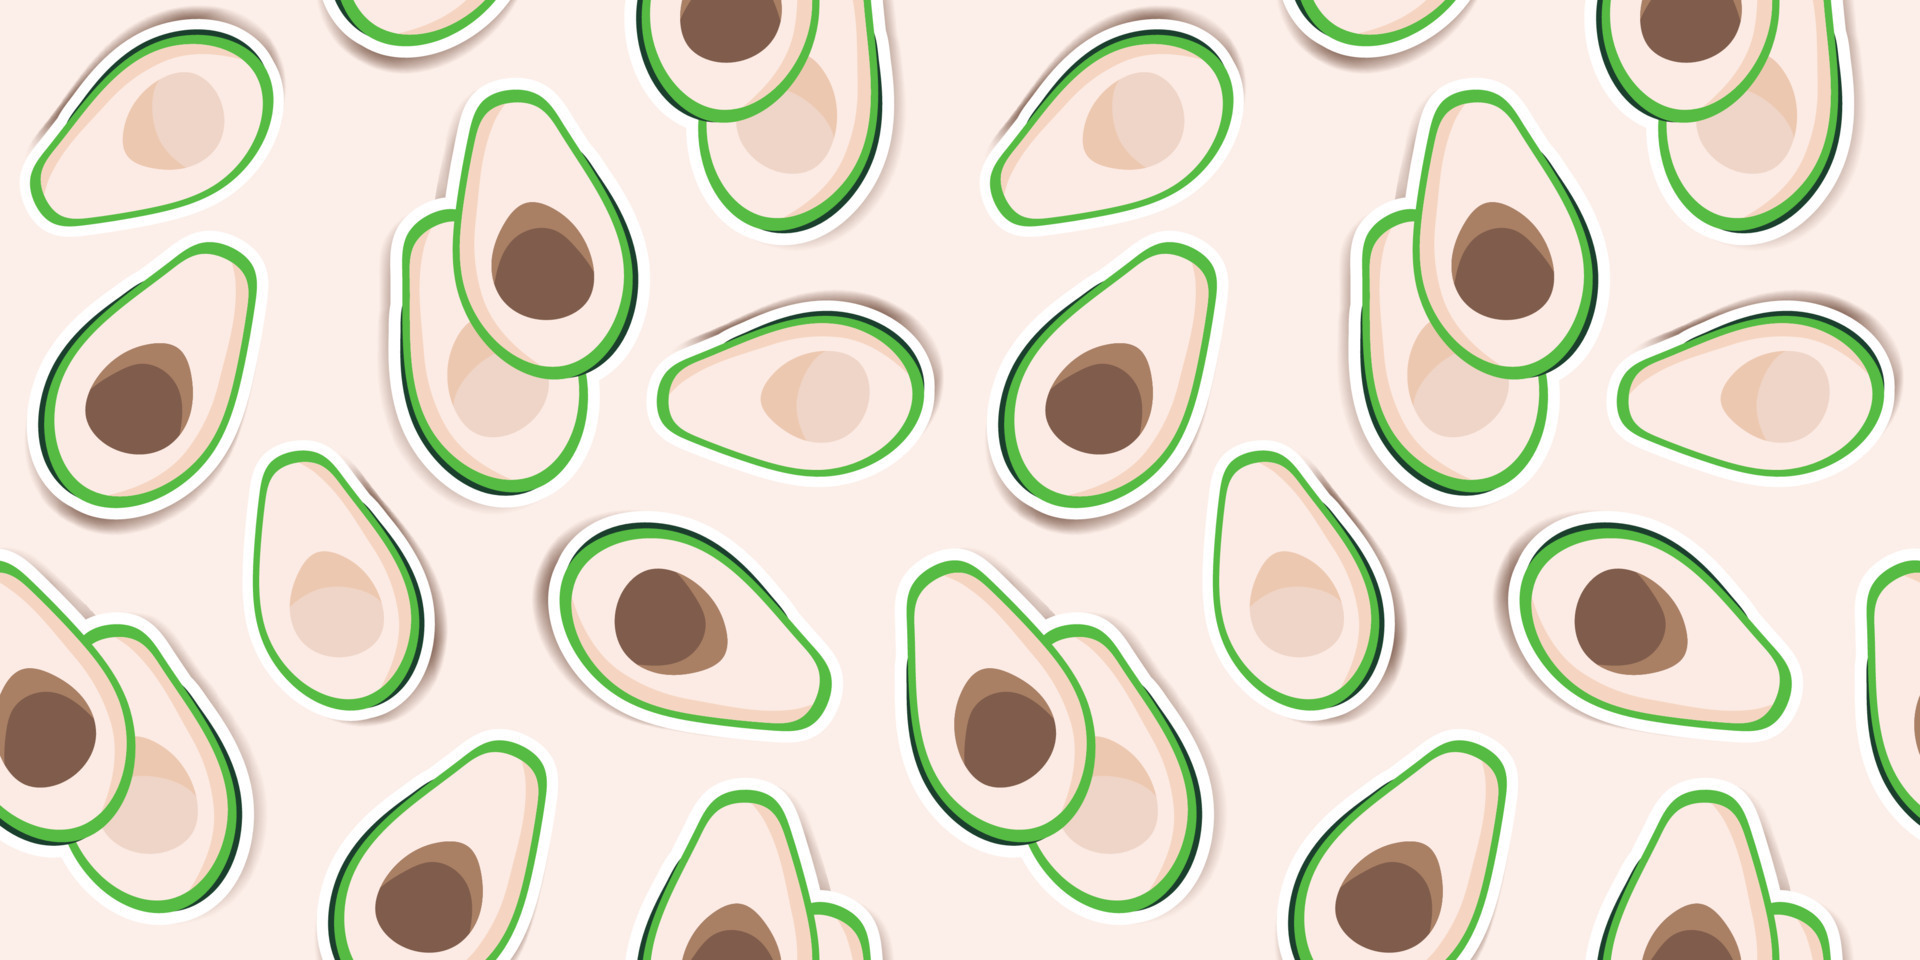 Cute green avocados on a light pibk background. Trendy avocado pattern design for wallpaper, print, fabric and stationery design. Green avocados sticker pattern. Illustrated vector fruit